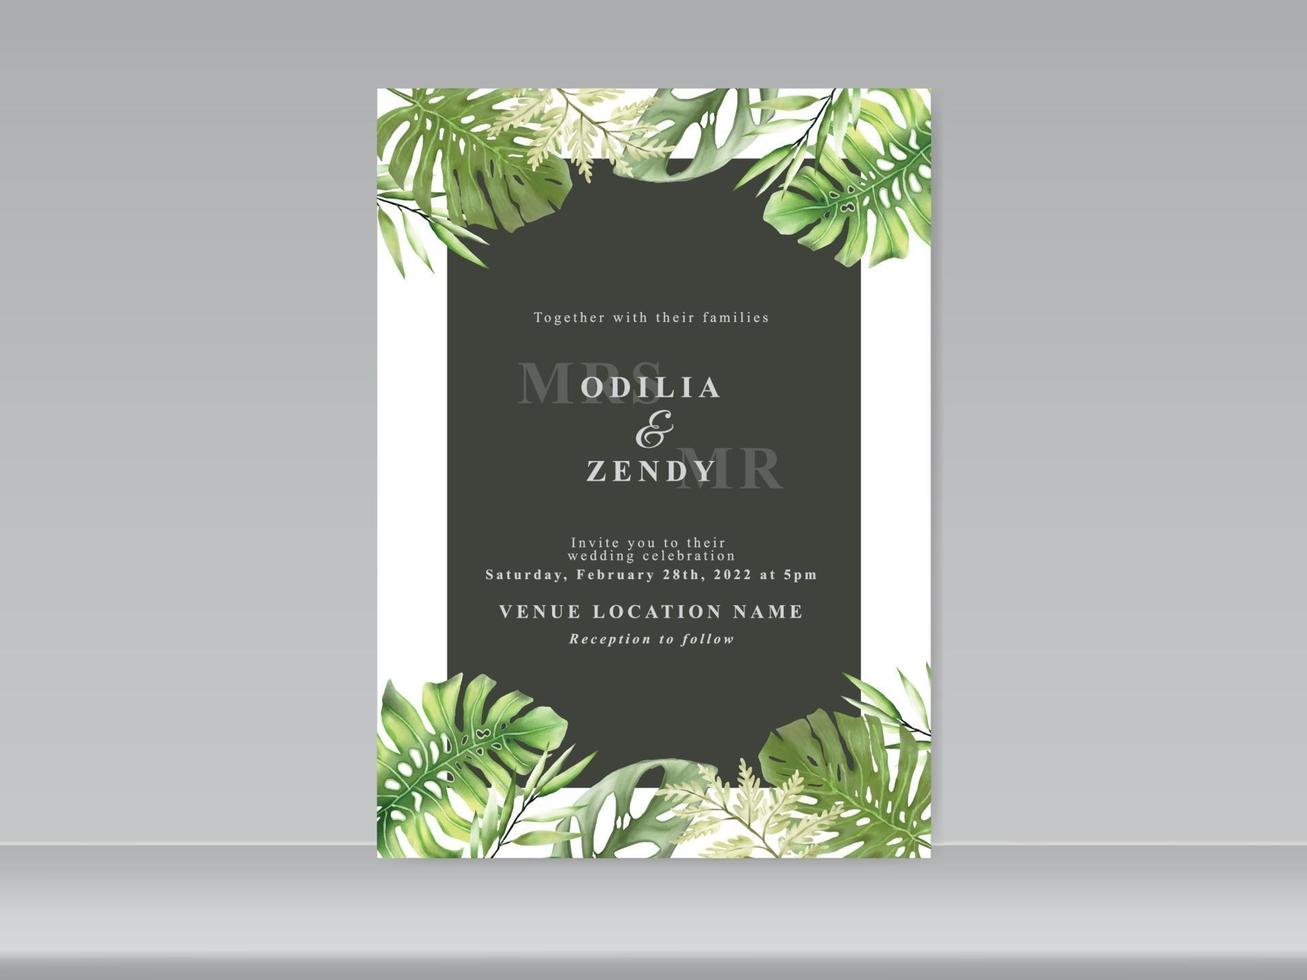 Wedding invitation cards with greenery floral design vector